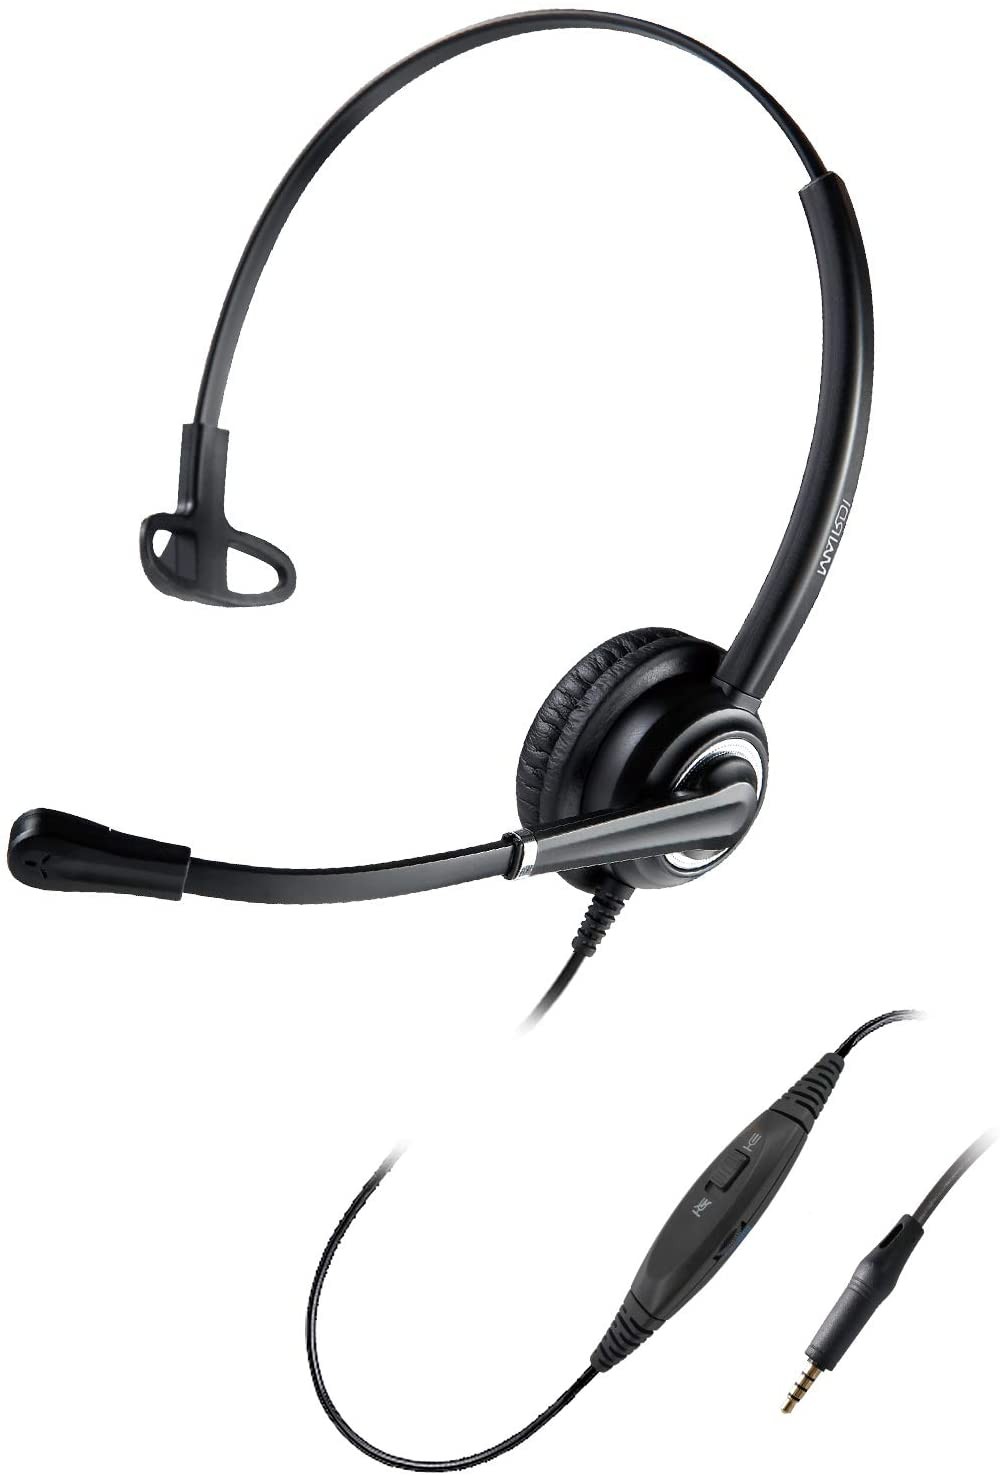 MAIRDI Cell Phone Headset with Nosie Cancelling Microphone Mono 3.5mm Jack Headset with Mic Mute